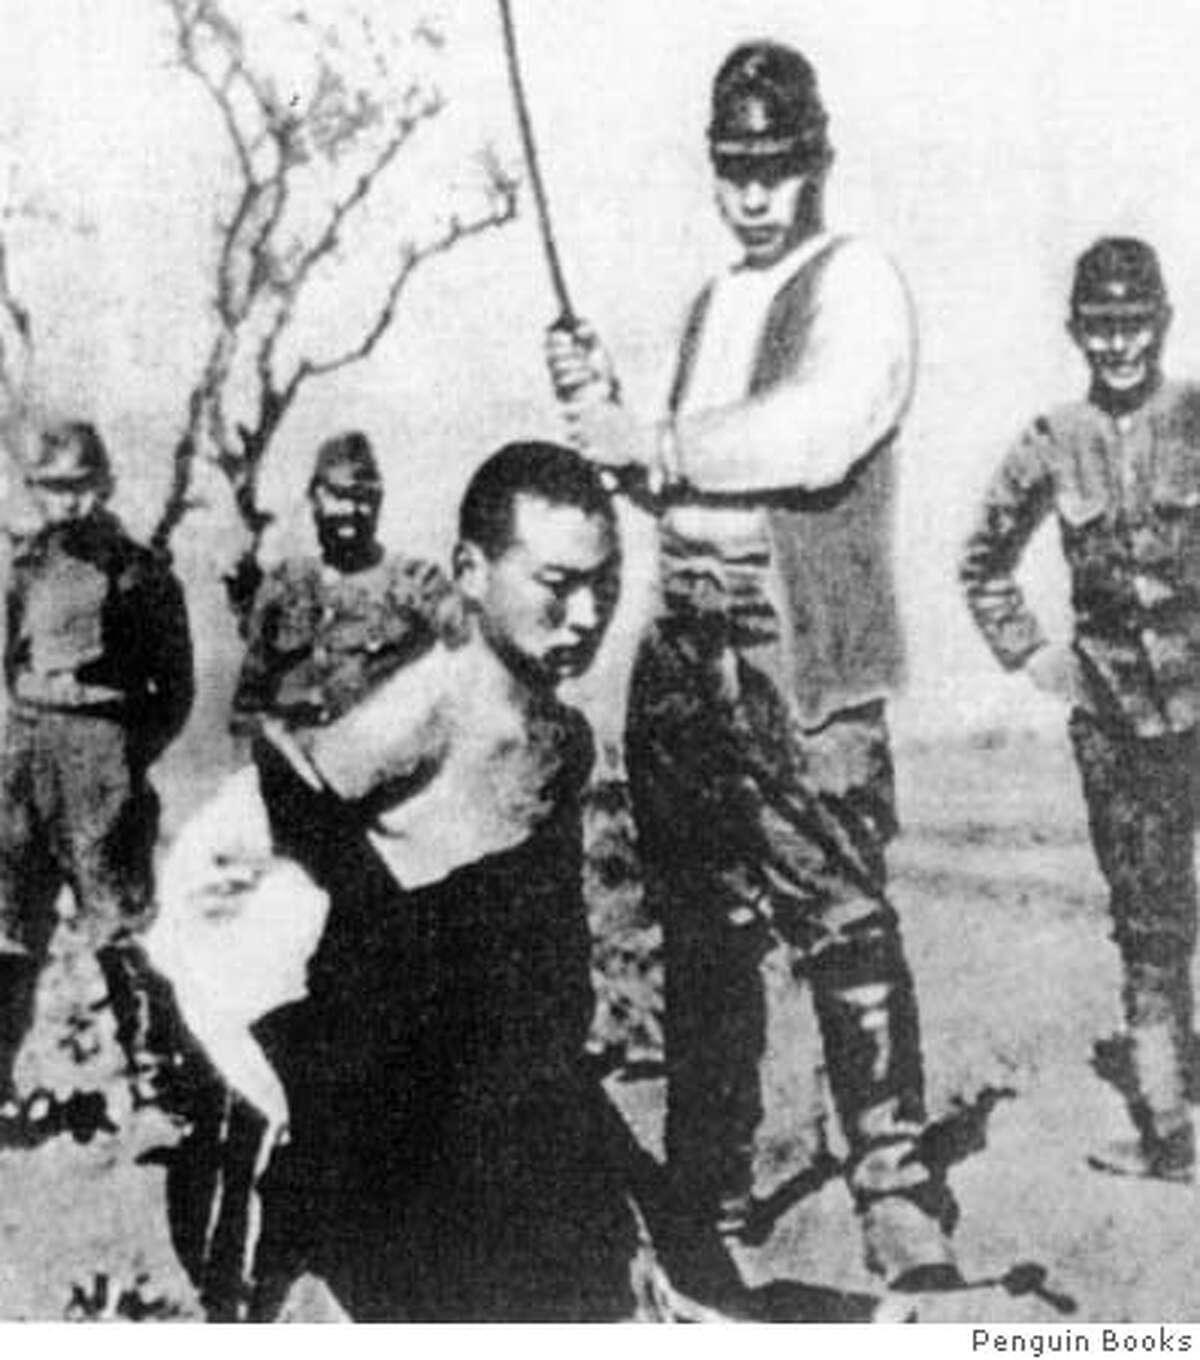 Chang20 In Nanking the Japanese turned murder into sport. Note the smiles on the Japanese in the background. (Revolutionary Documents, Taipei/Penguin Books Datebook#Datebook#Chronicle#11/20/2004#ALL#Advance##0422474067